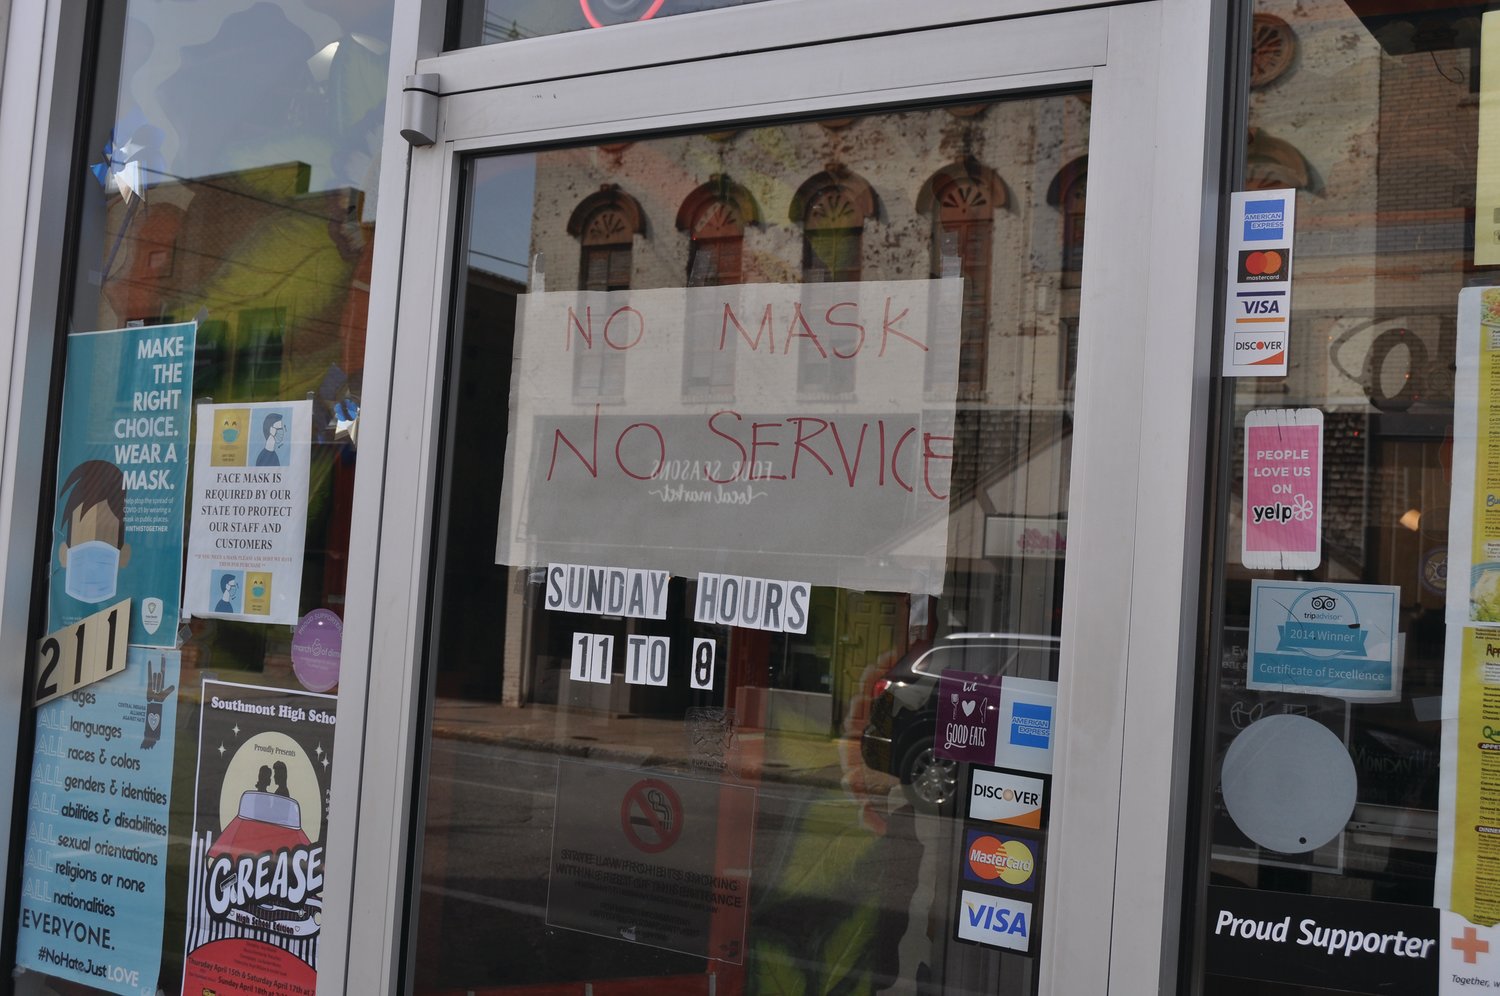 A sign notifying customers of the mask order hangs in the window at Little Mexico Tuesday morning. The sign was removed later in the day.